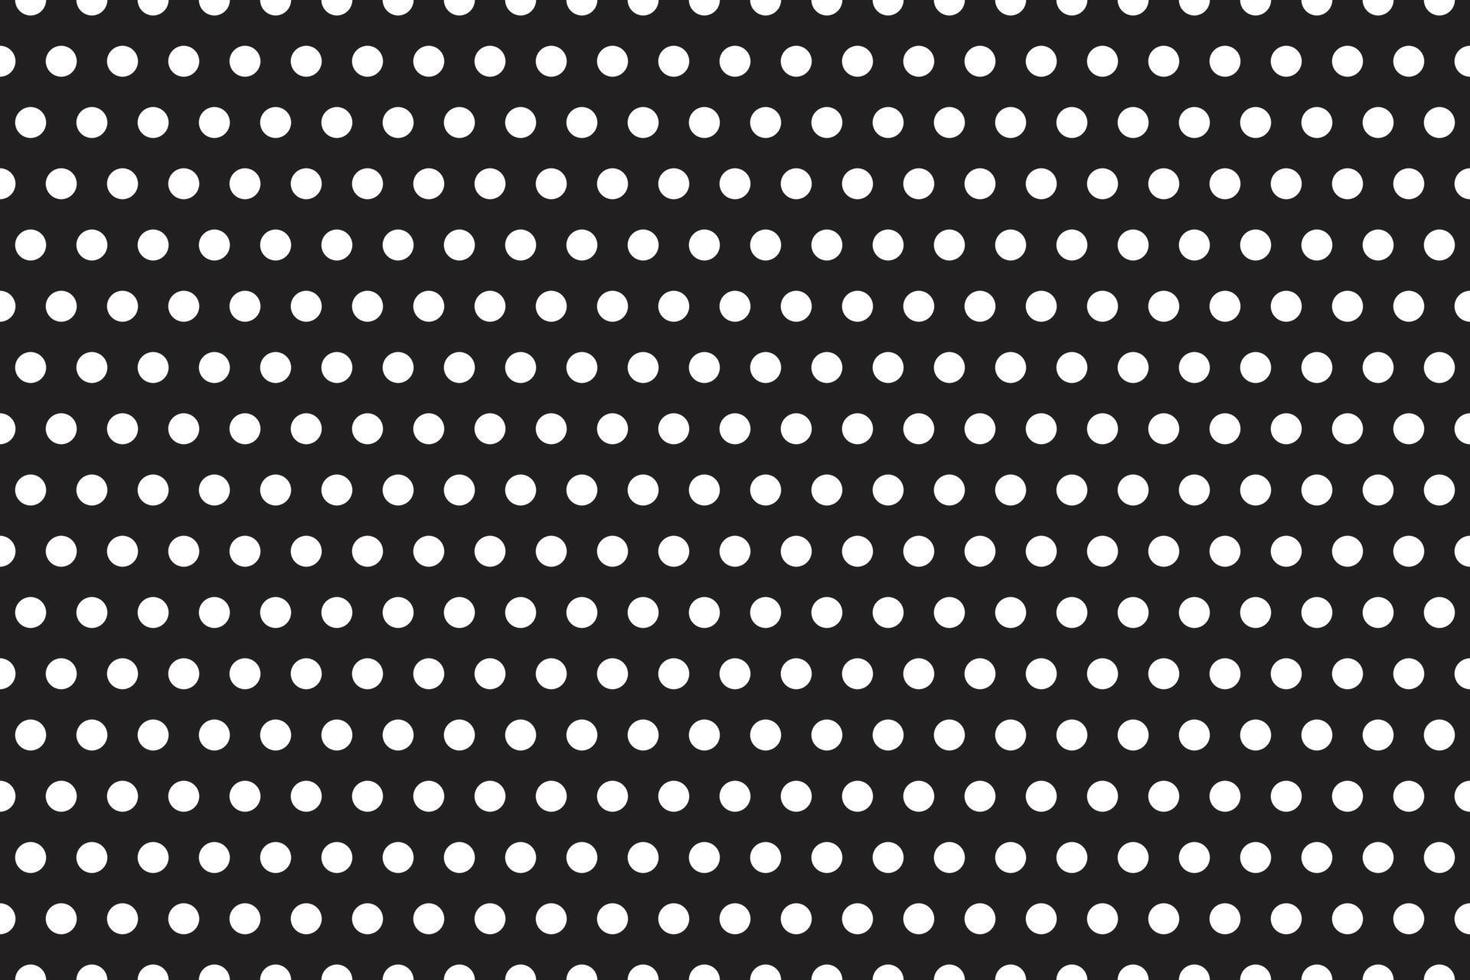 abstrac wavy simple white polka dot pattern on black background. vector